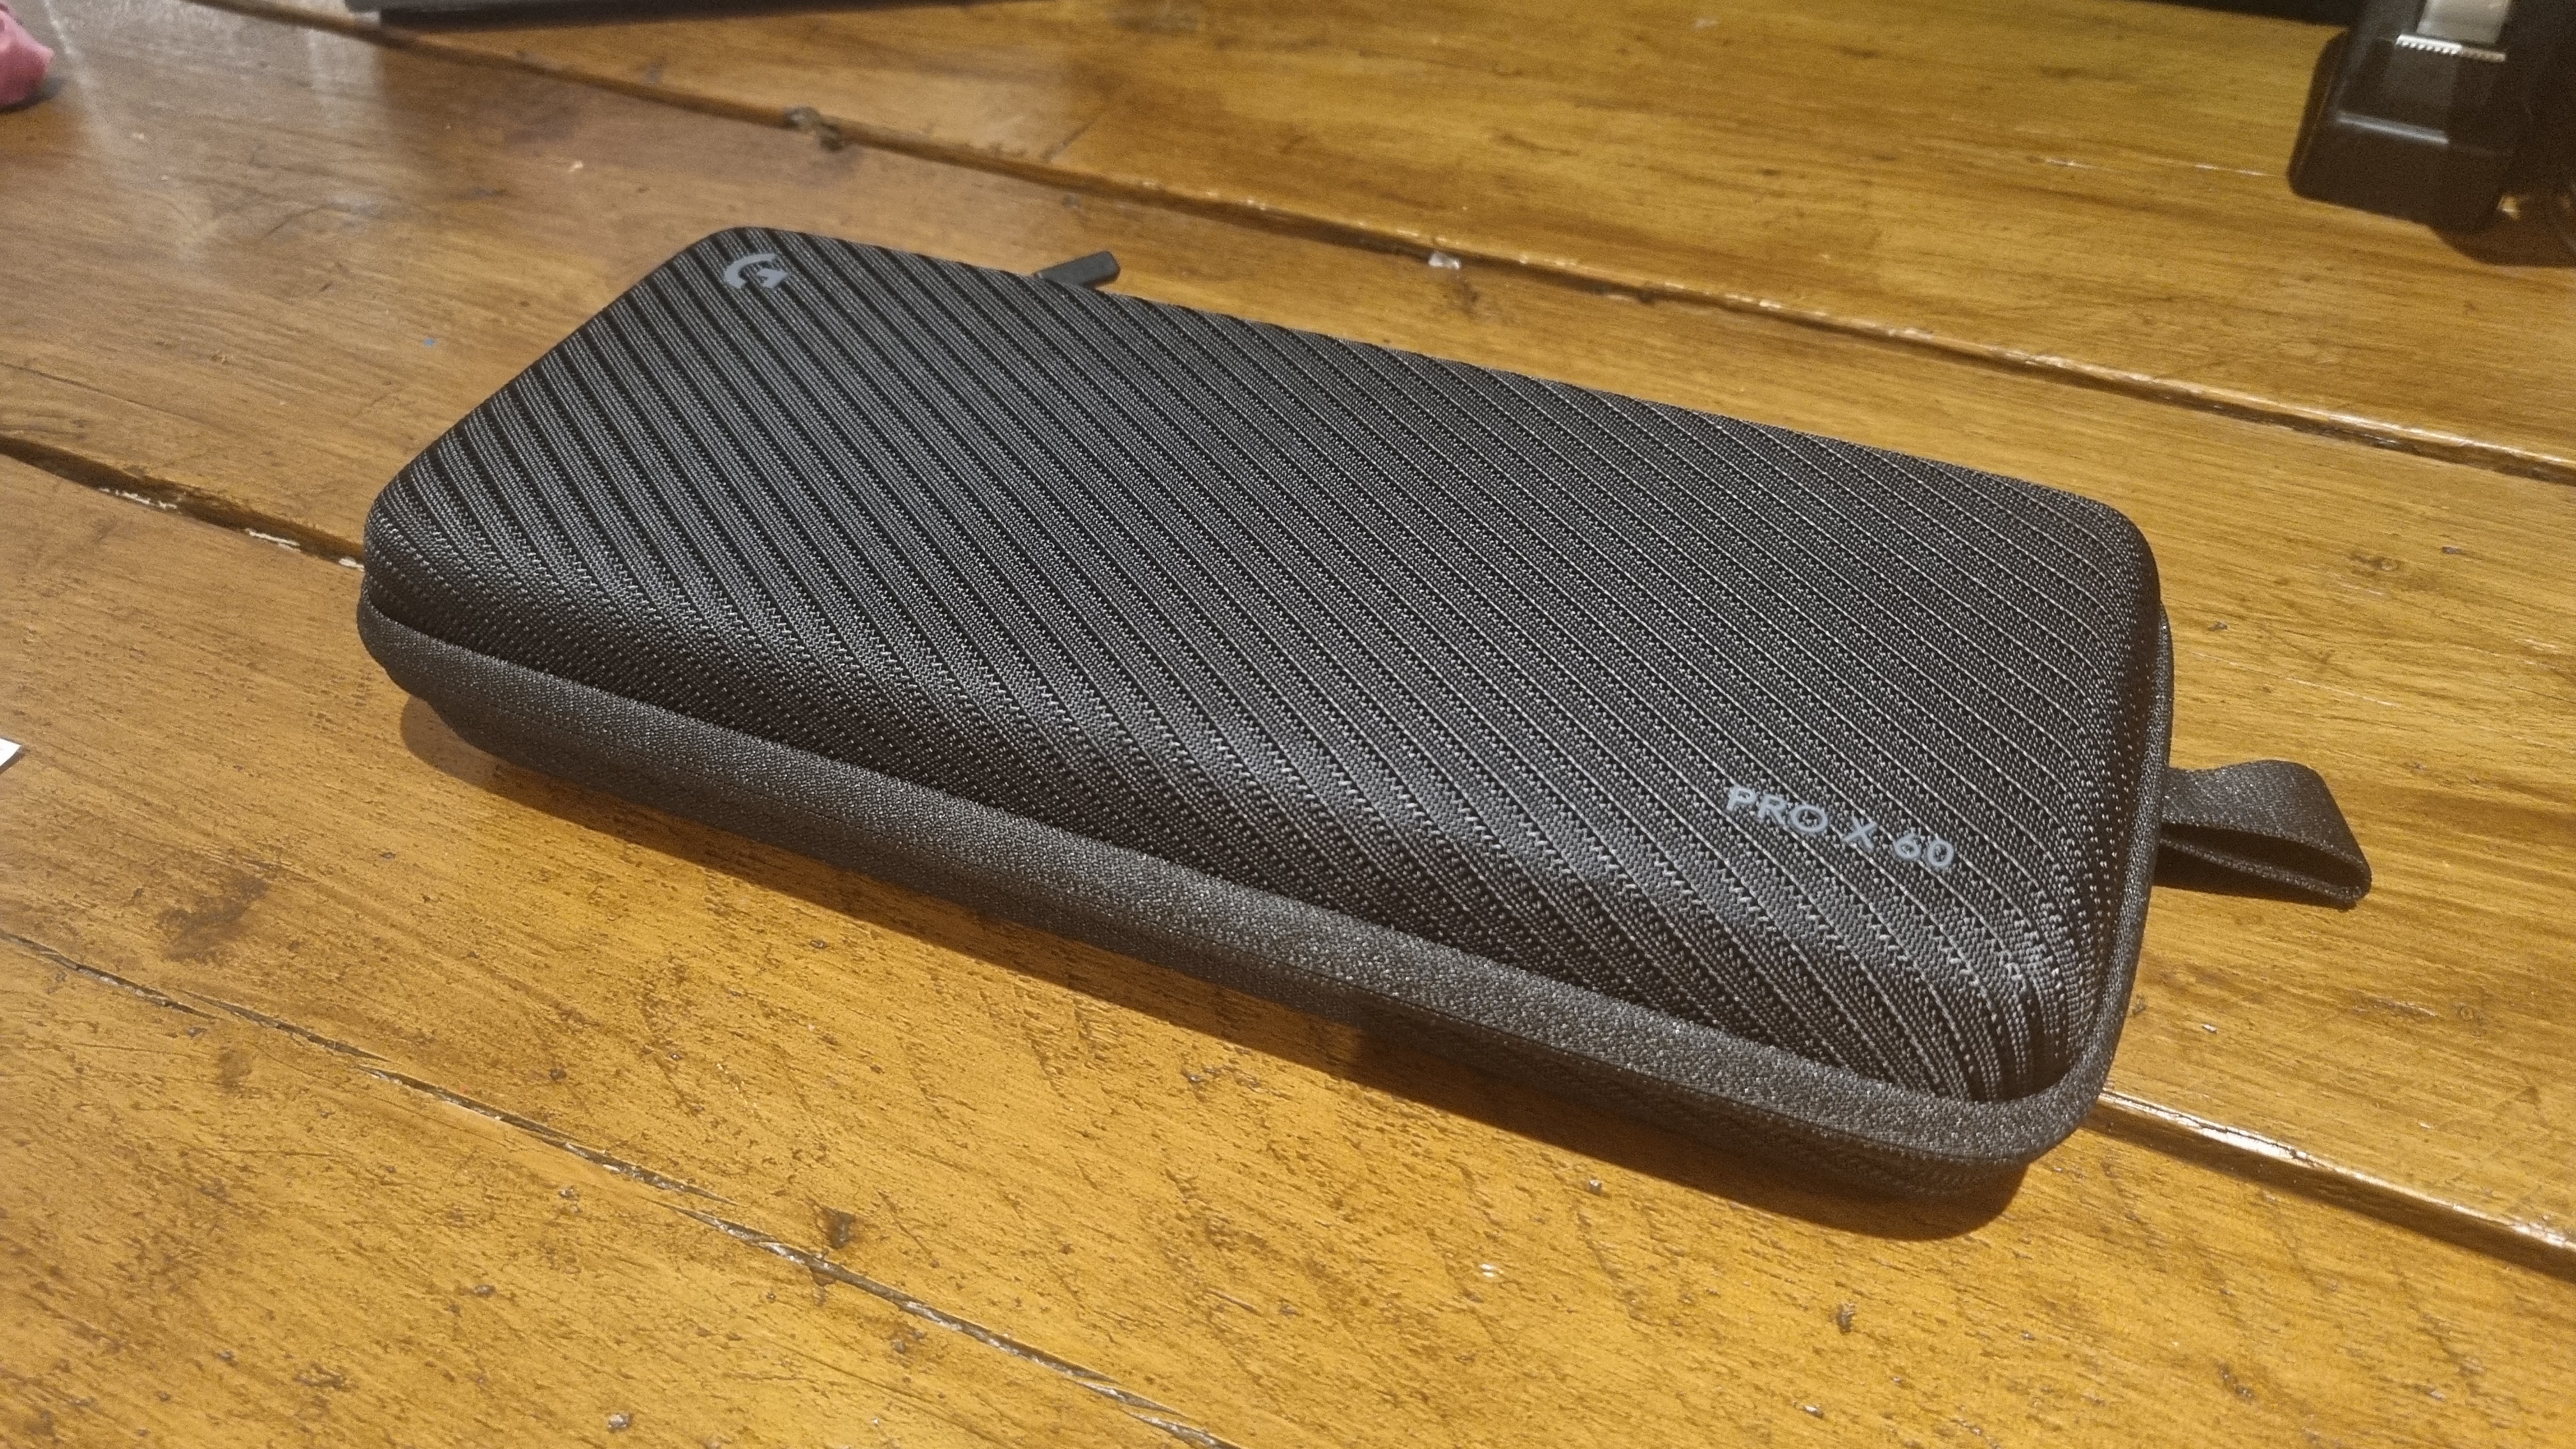 The carrying case for the Logitech Pro X60